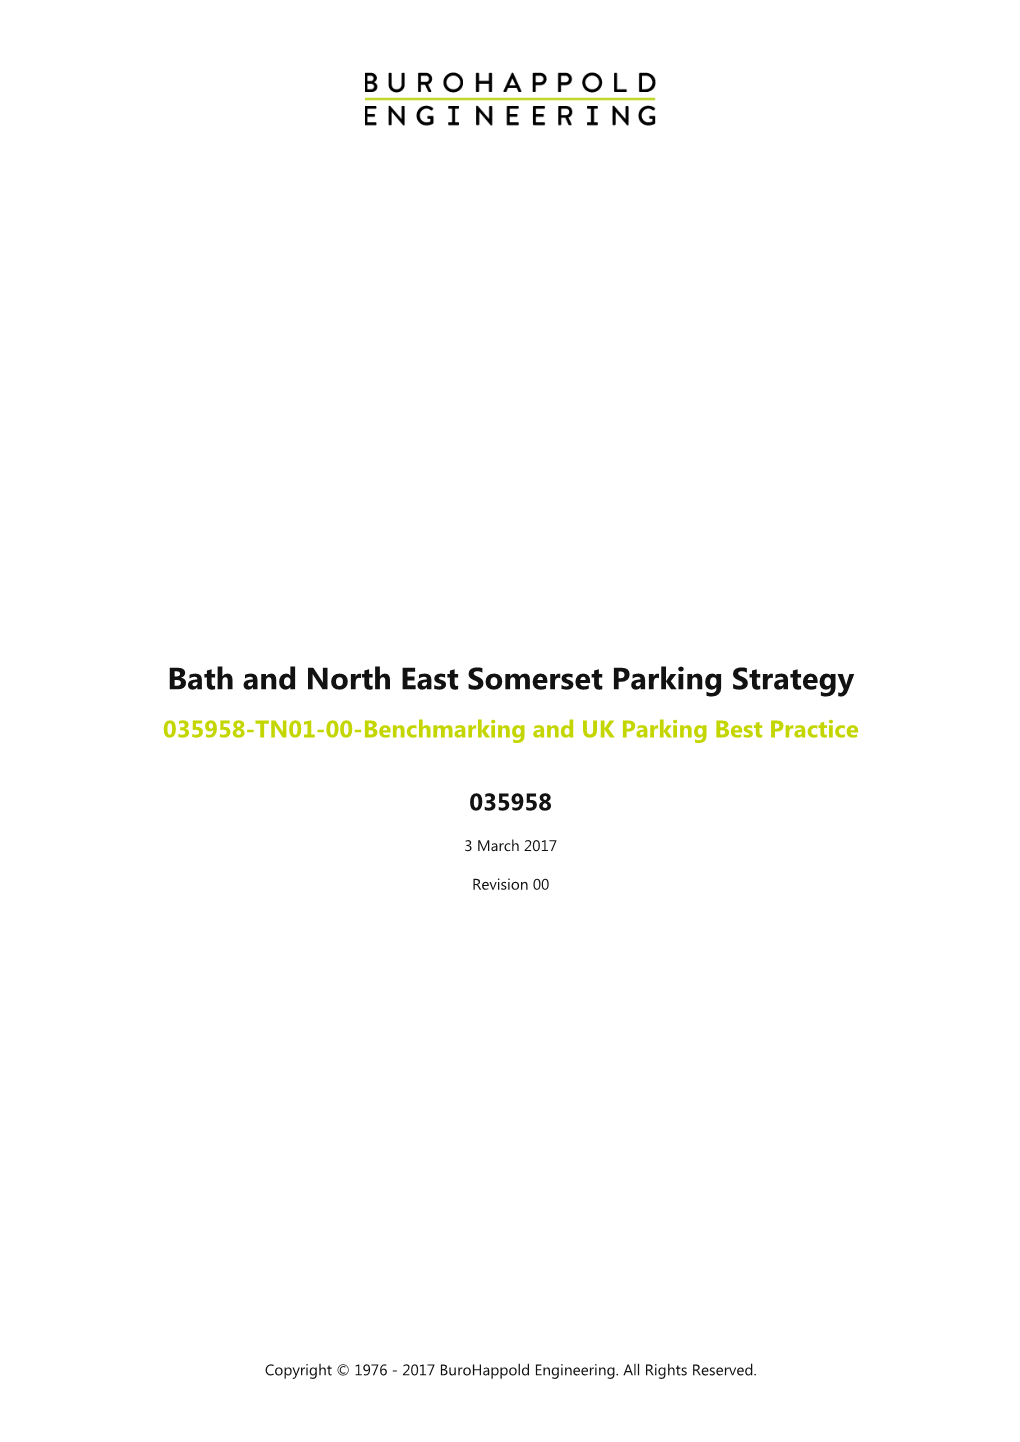 Benchmarking and UK Parking Best Practice